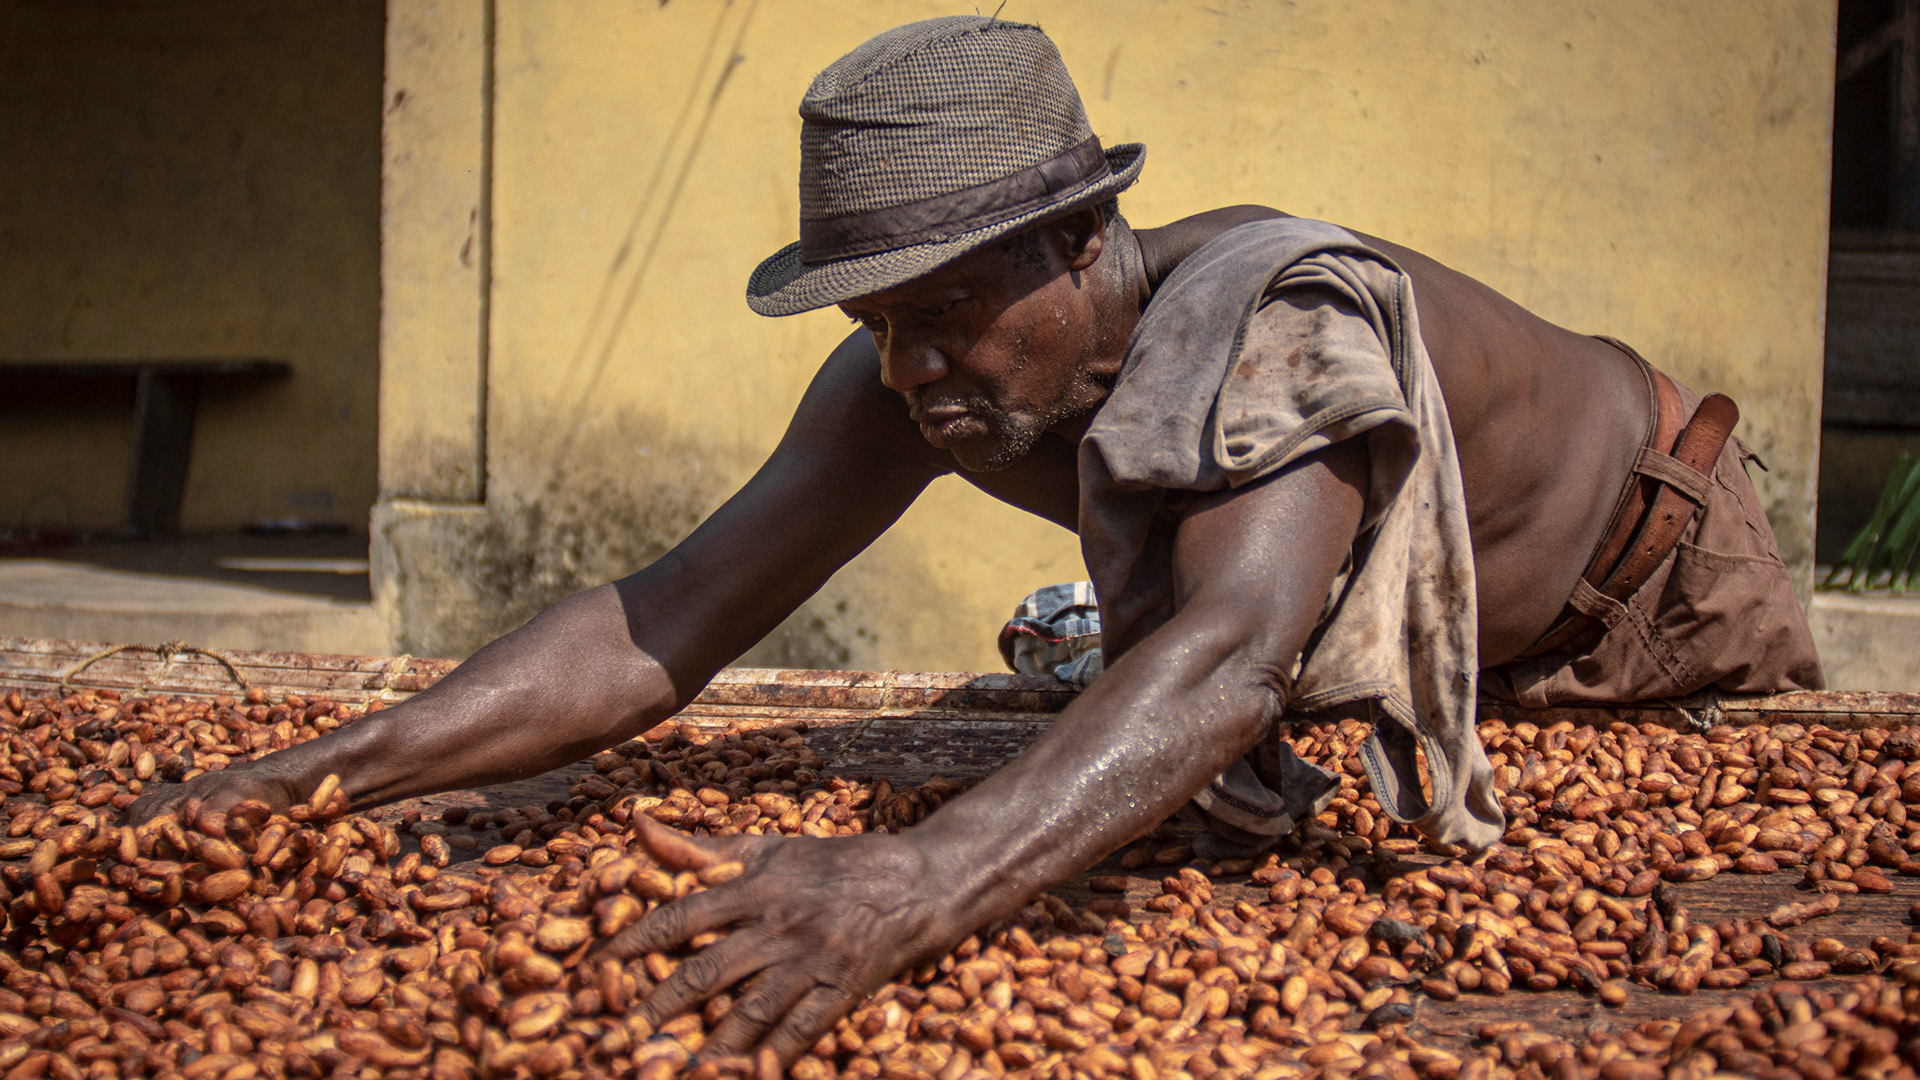 This year, cocoa has traded as high as ,000. Even as prices drop, futures are still double what they were at the start of the year.